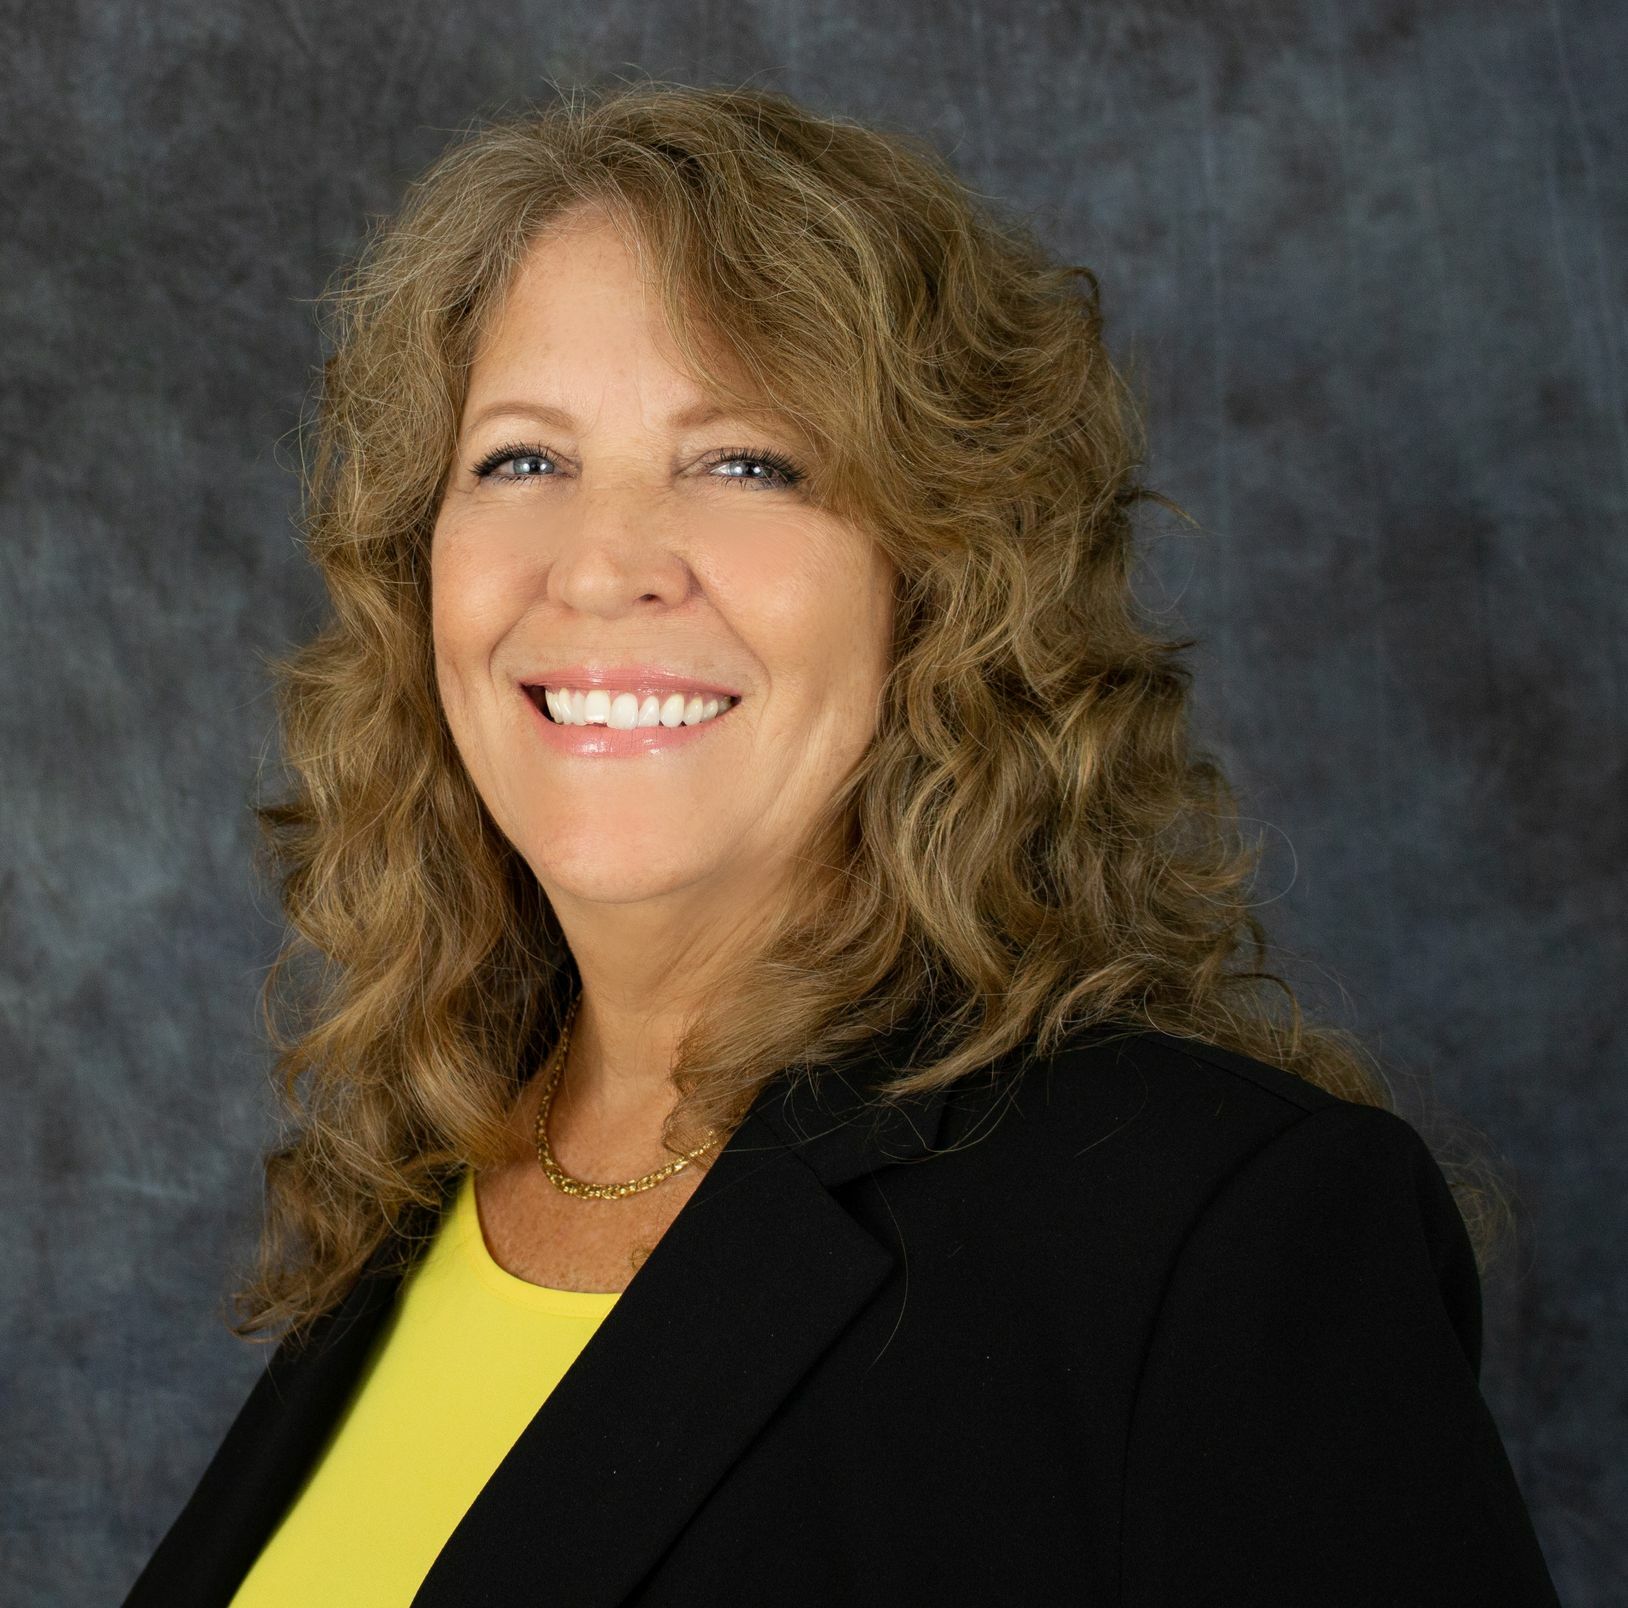 Sandy Whitlock, Real Estate Salesperson in Lakewood Ranch, Atchley Properties